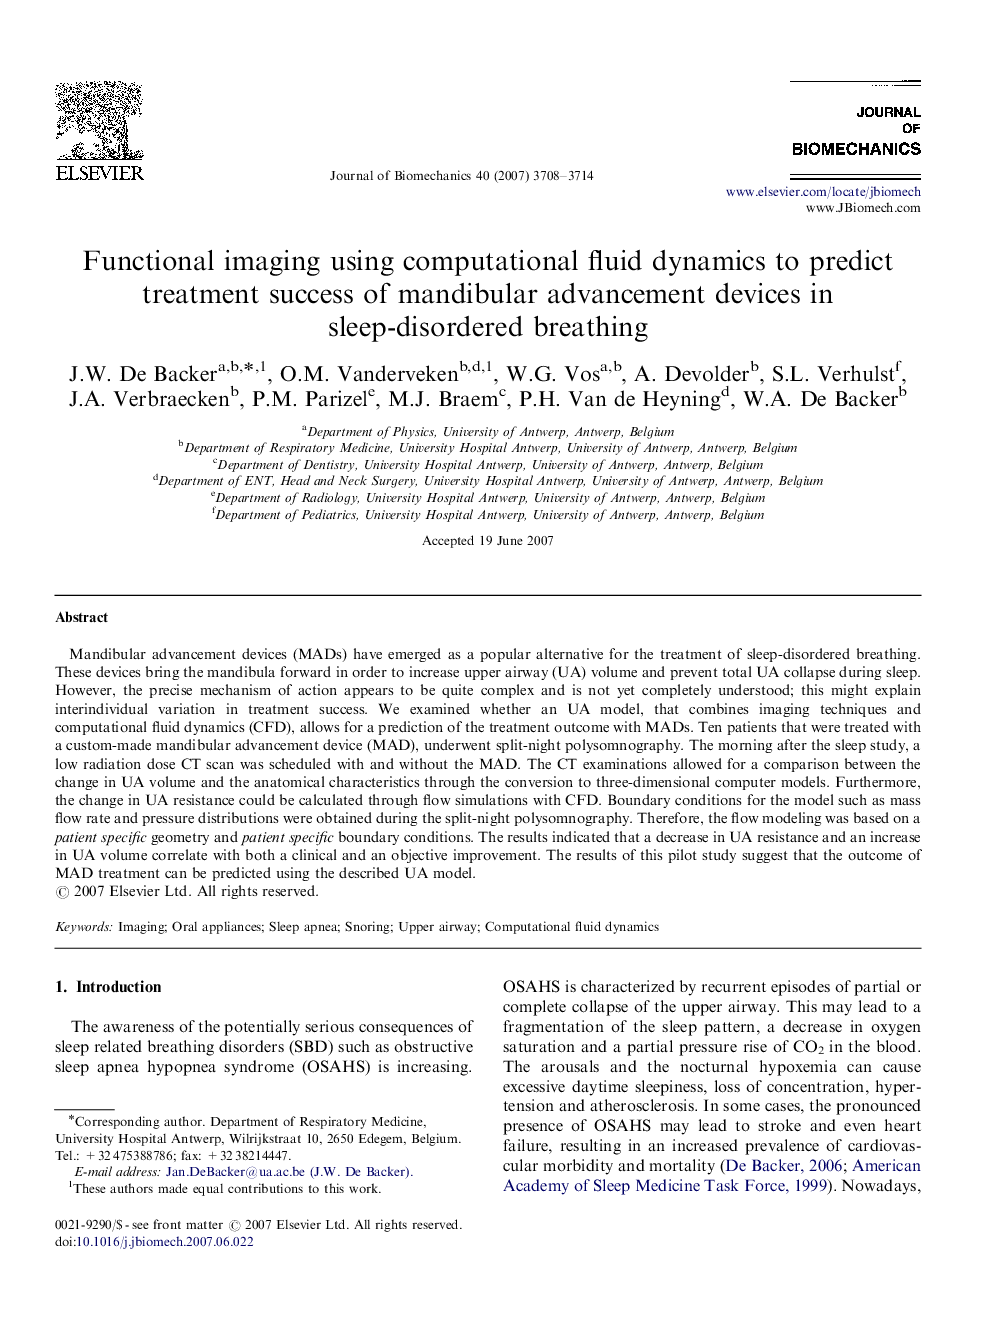 Functional imaging using computational fluid dynamics to predict treatment success of mandibular advancement devices in sleep-disordered breathing